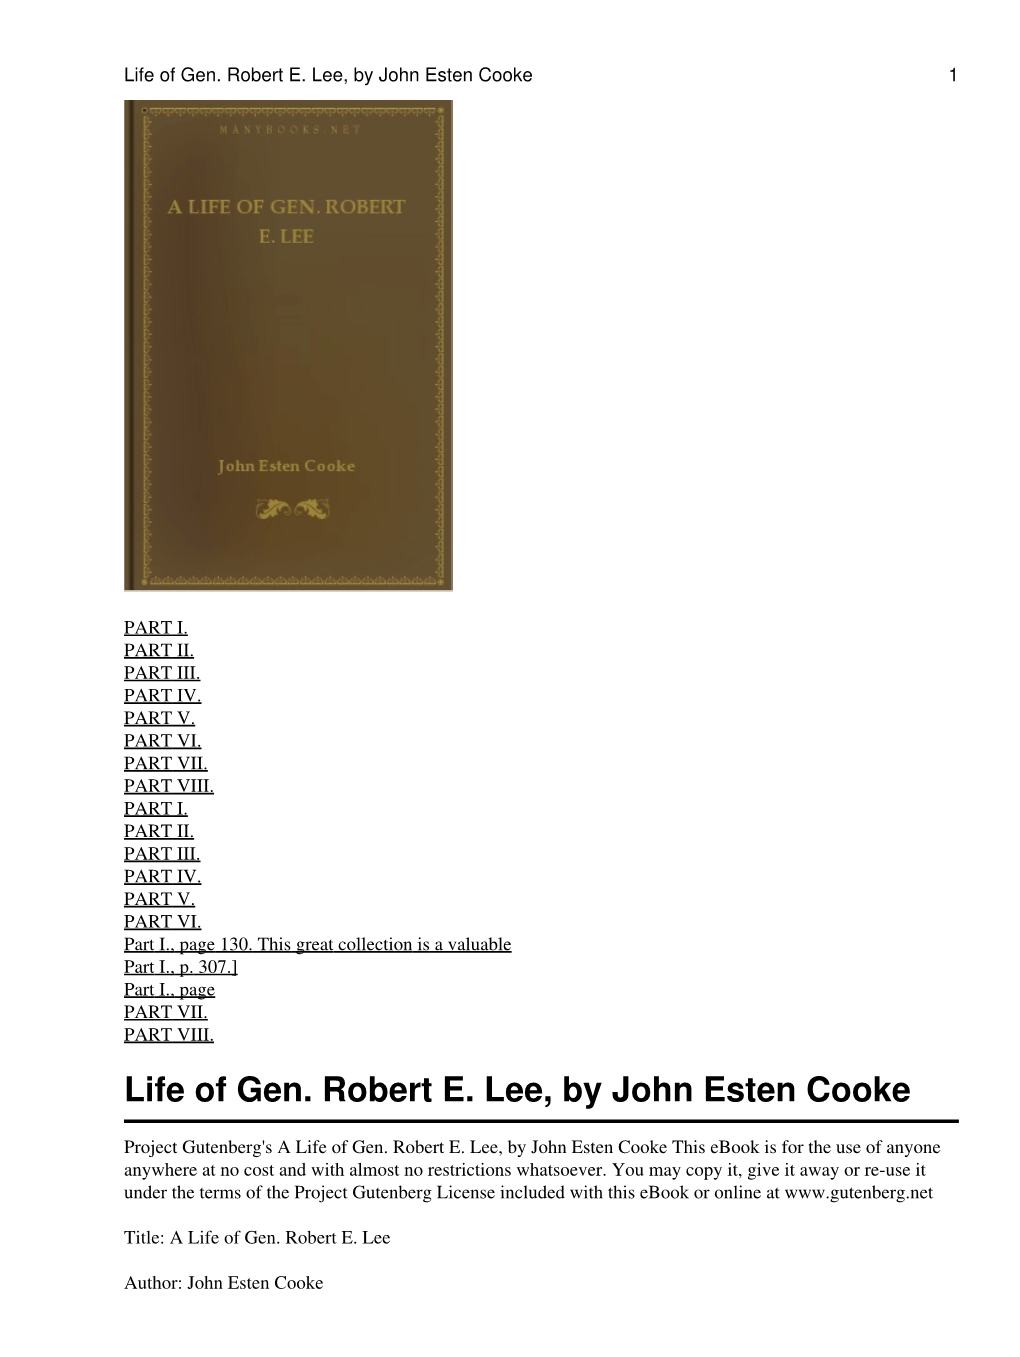 A Life of Gen. Robert E. Lee, by John Esten Cooke This Ebook Is for the Use of Anyone Anywhere at No Cost and with Almost No Restrictions Whatsoever